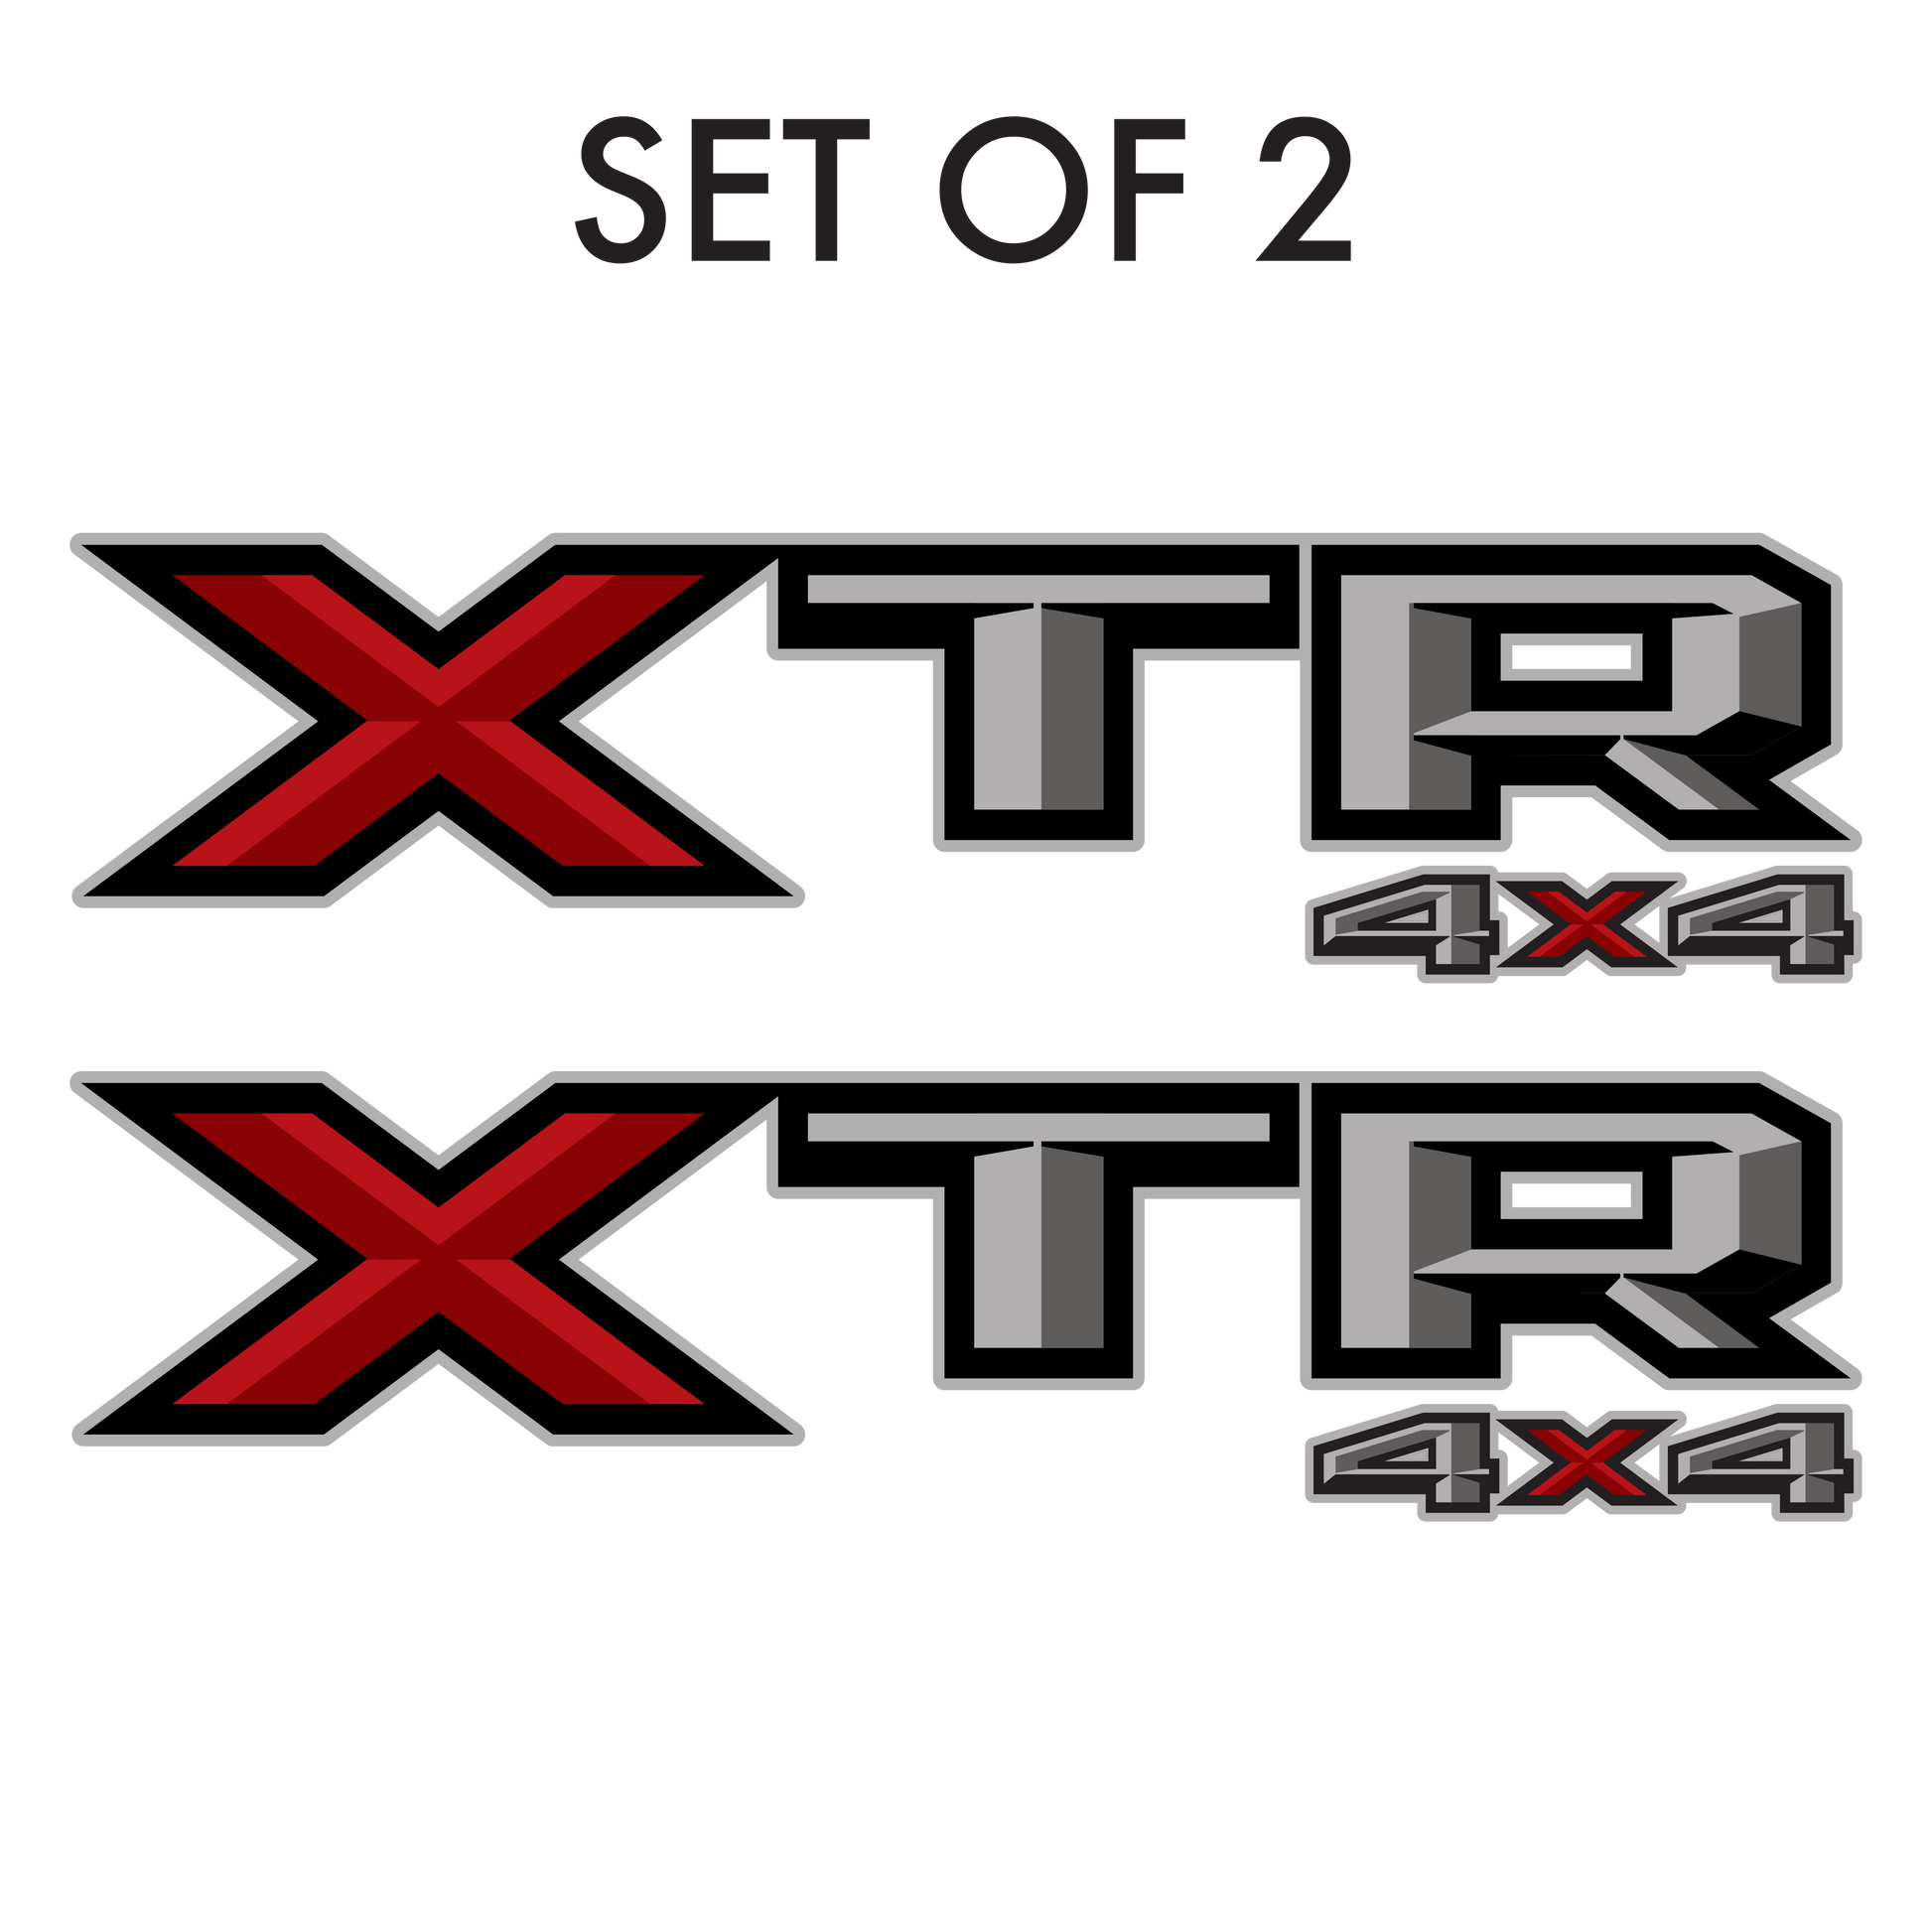 Set of 2: XTR 4X4 vinyl decal for 2017-2019 Ford F-150 F-250 pickup truck bedside - US Rallystripes